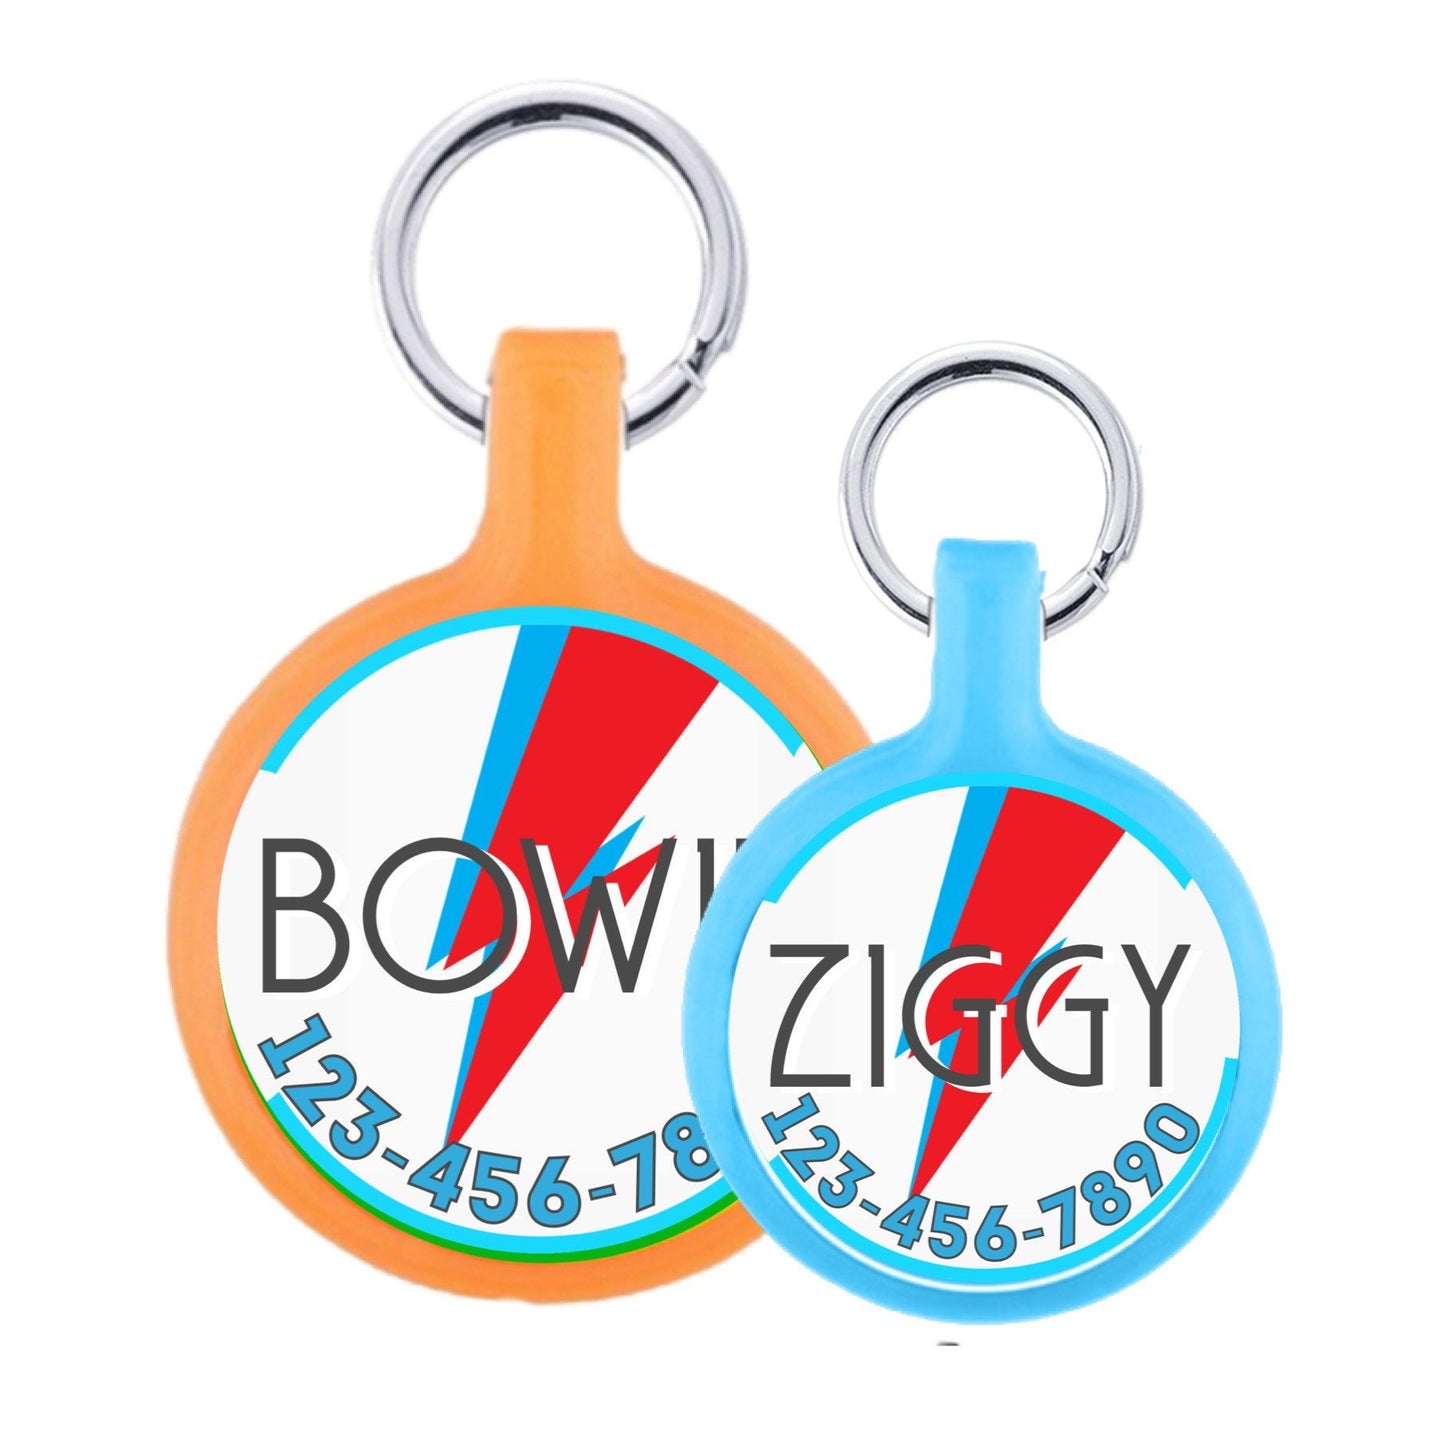 Bowie Ziggy Stardust  Dog or Cat ID Pet Tag with Optional Personalization